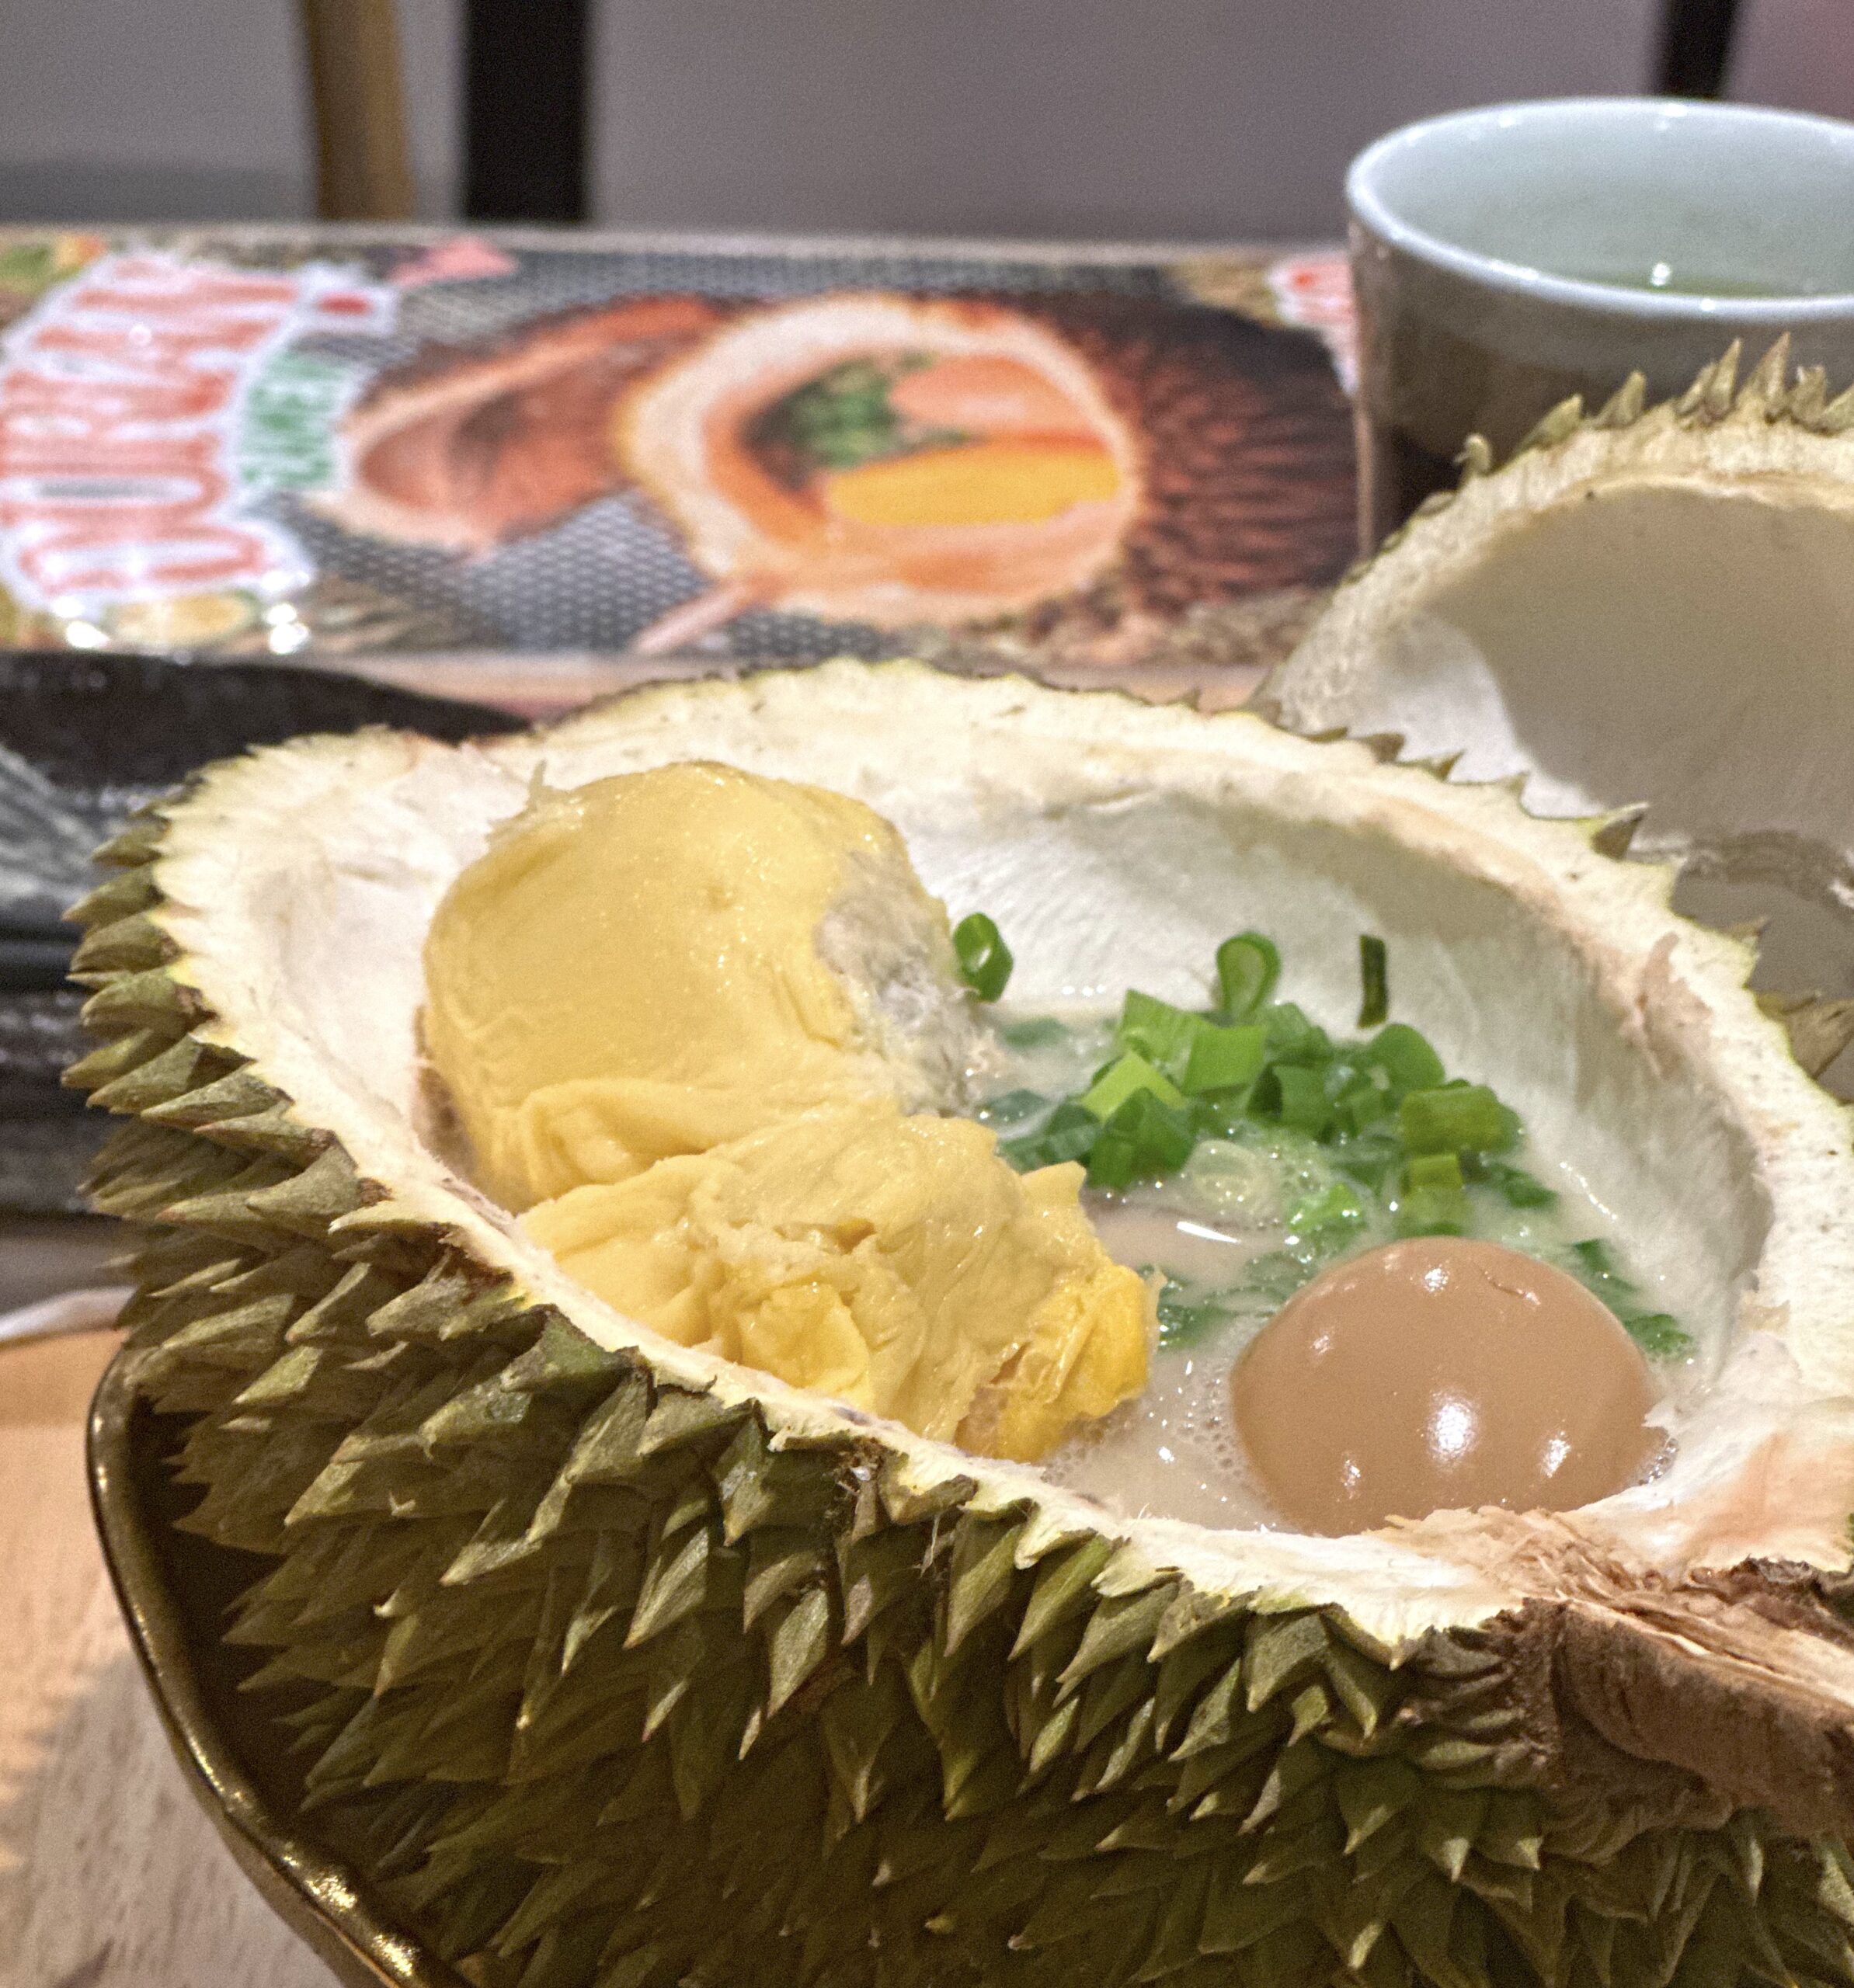 Durian ramen at menya shishido pj almost tore our gang apart. Here's what we think about this bold rm40 dish | weirdkaya